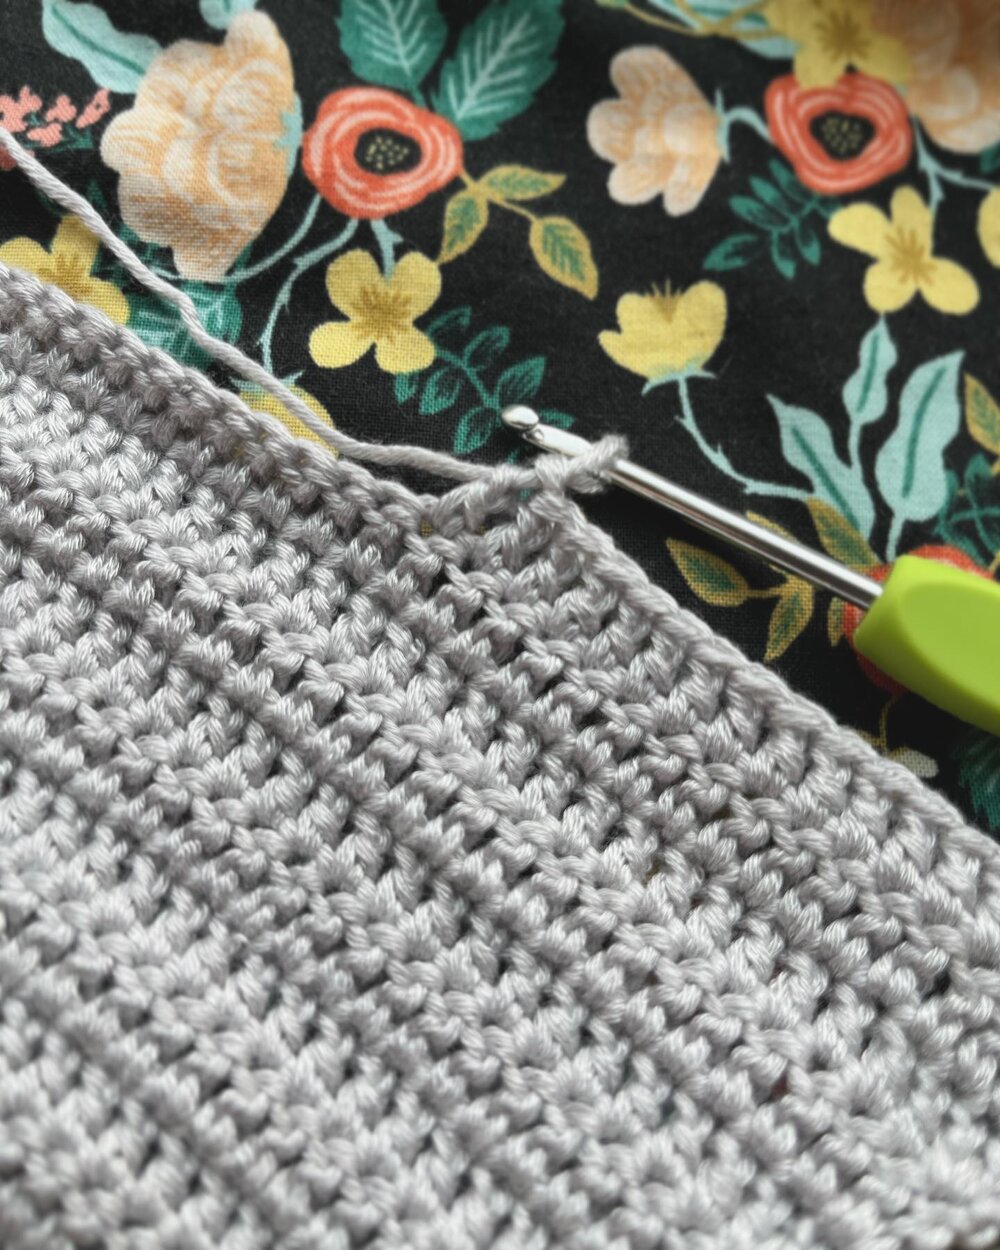 Until a few days ago, I hadn&rsquo;t crocheted anything in weeks. I&rsquo;m really busy with work out of town, and I&rsquo;ve been hardcore binging Grey&rsquo;s Anatomy on Netflix during my evenings - it has been such a restful time!
~
This pretty si